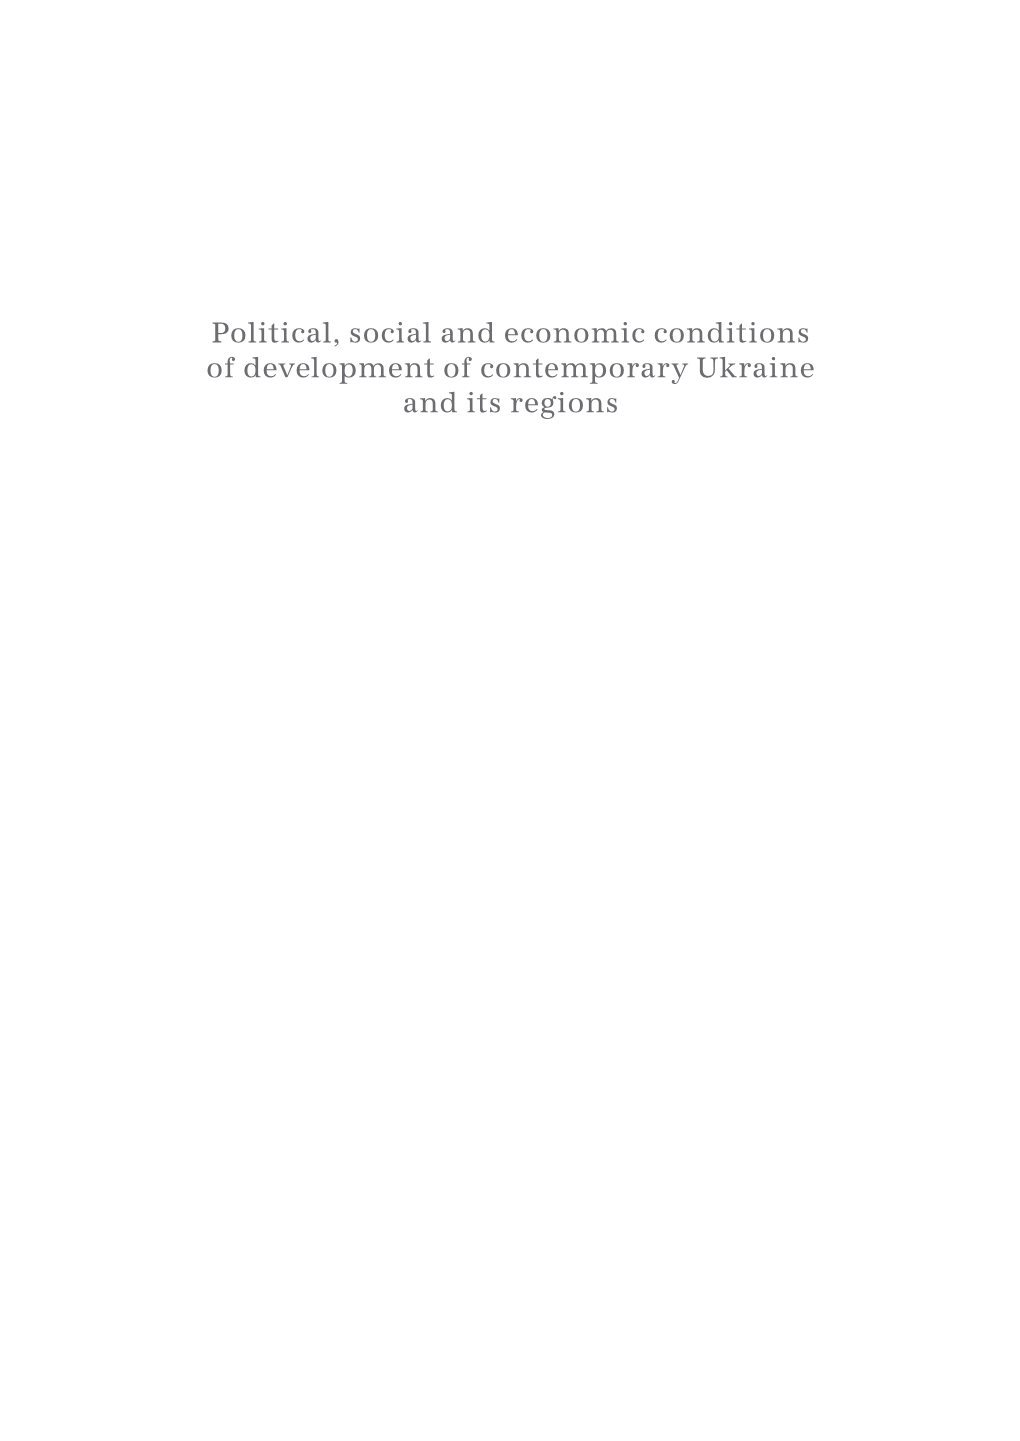 Political, Social and Economic Conditions of Development of Contemporary Ukraine and Its Regions the JOHN PAUL II CATHOLIC UNIVERSITY of LUBLIN